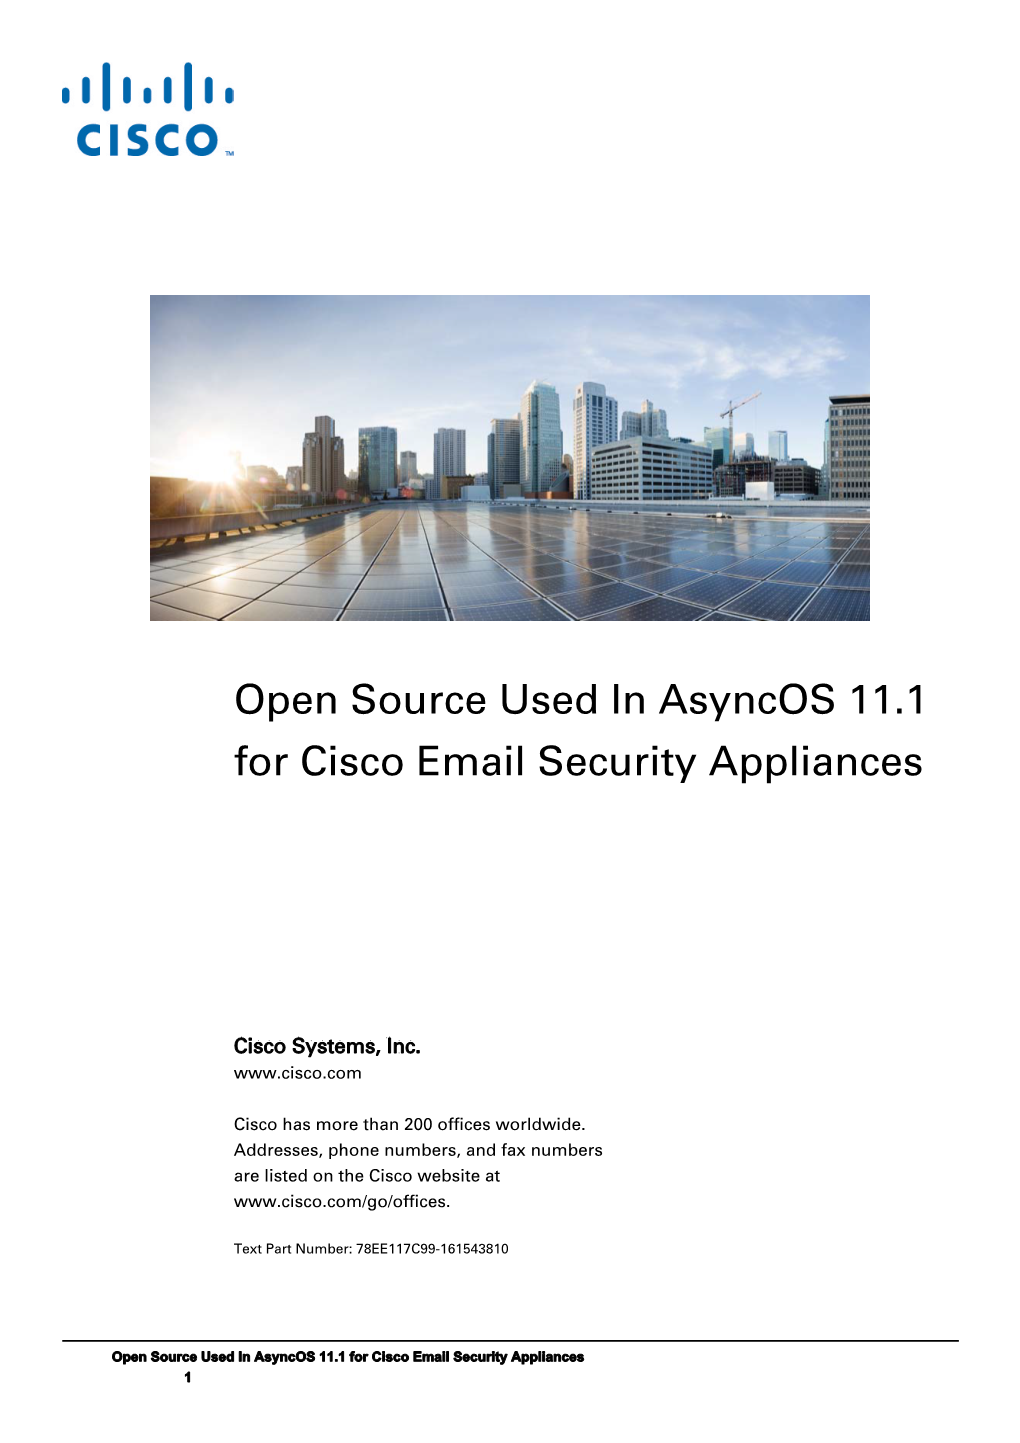 Open Source Used in Asyncos 11.1 for Cisco Email Security Appliances